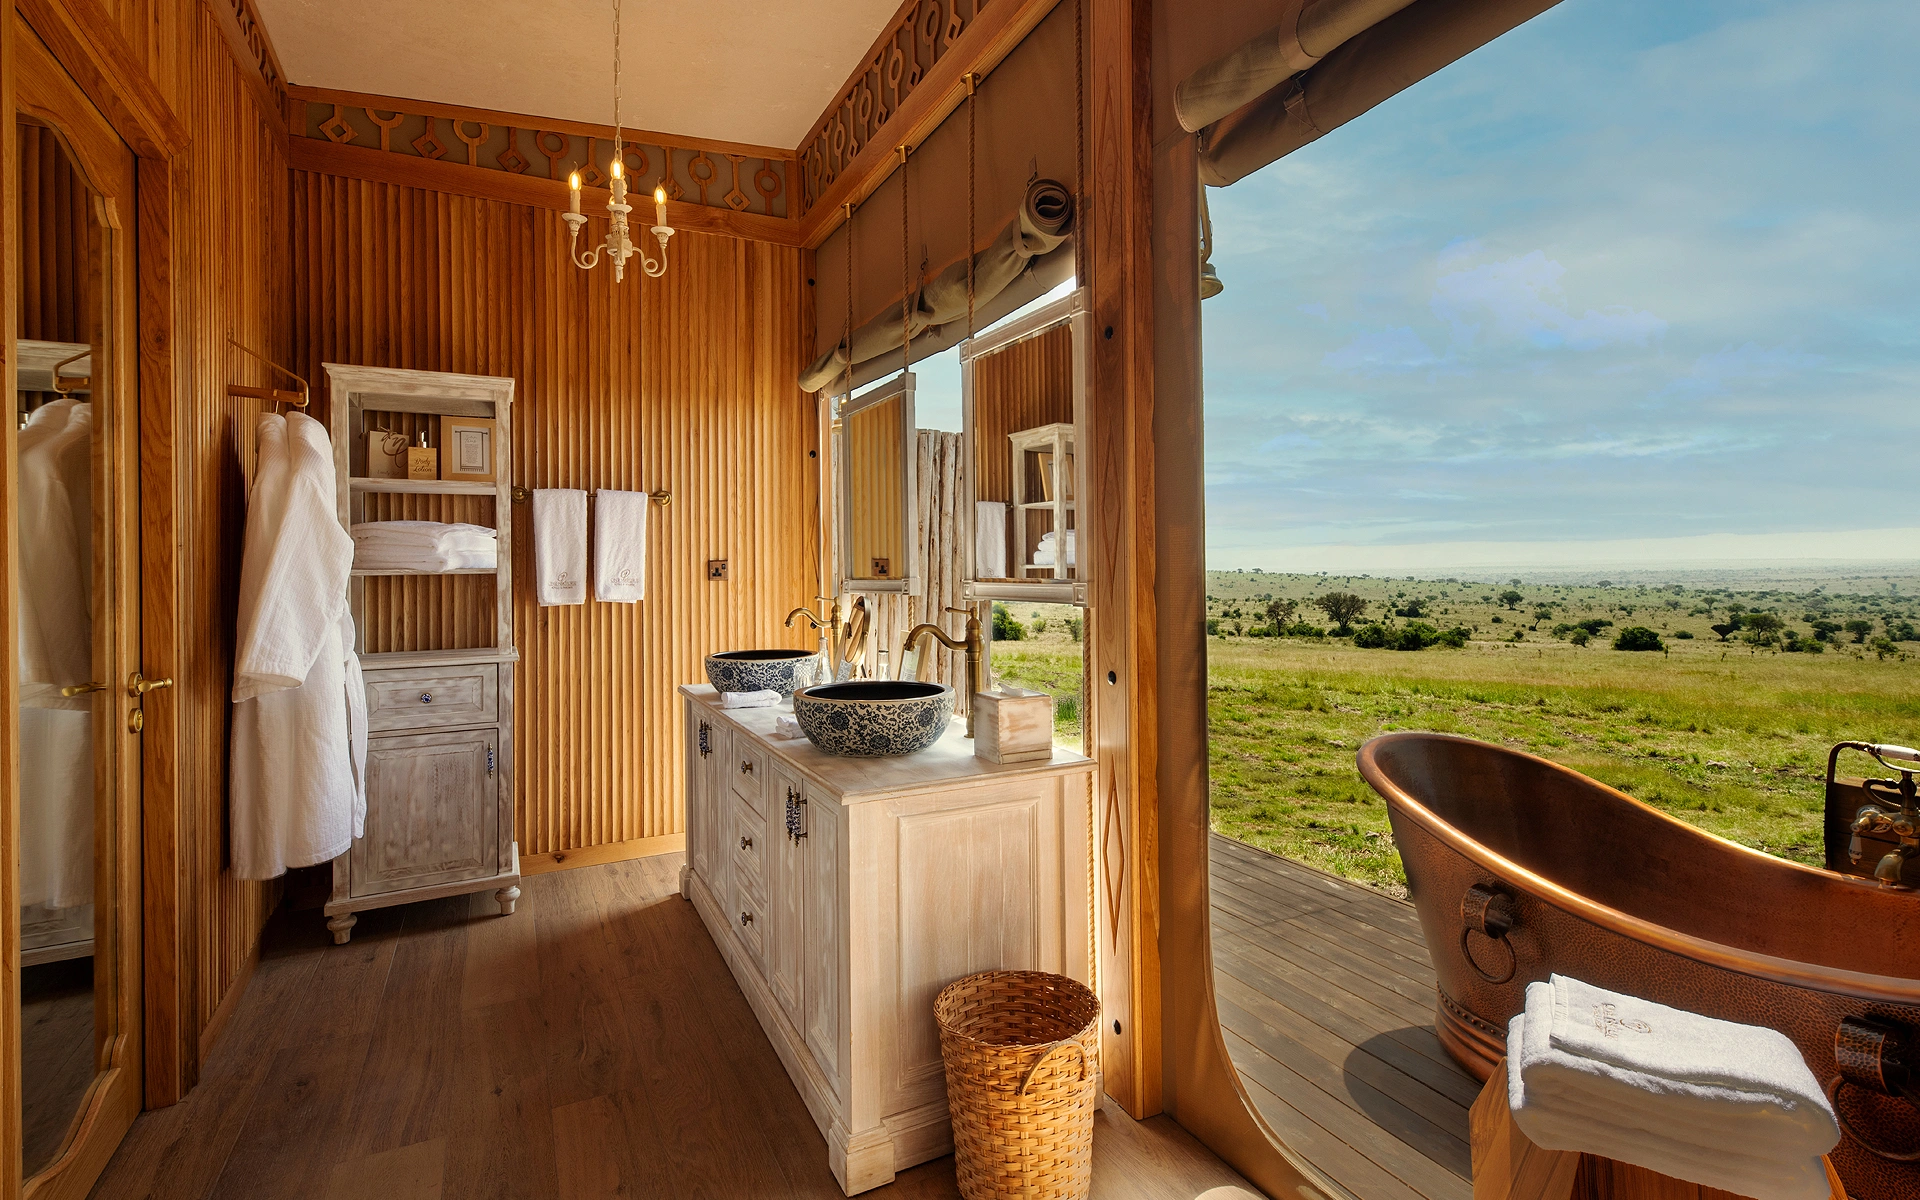 Ensuite bathrooms, private pools, and sun beds in the one-bedroom luxury villa at One Nature Mara River.